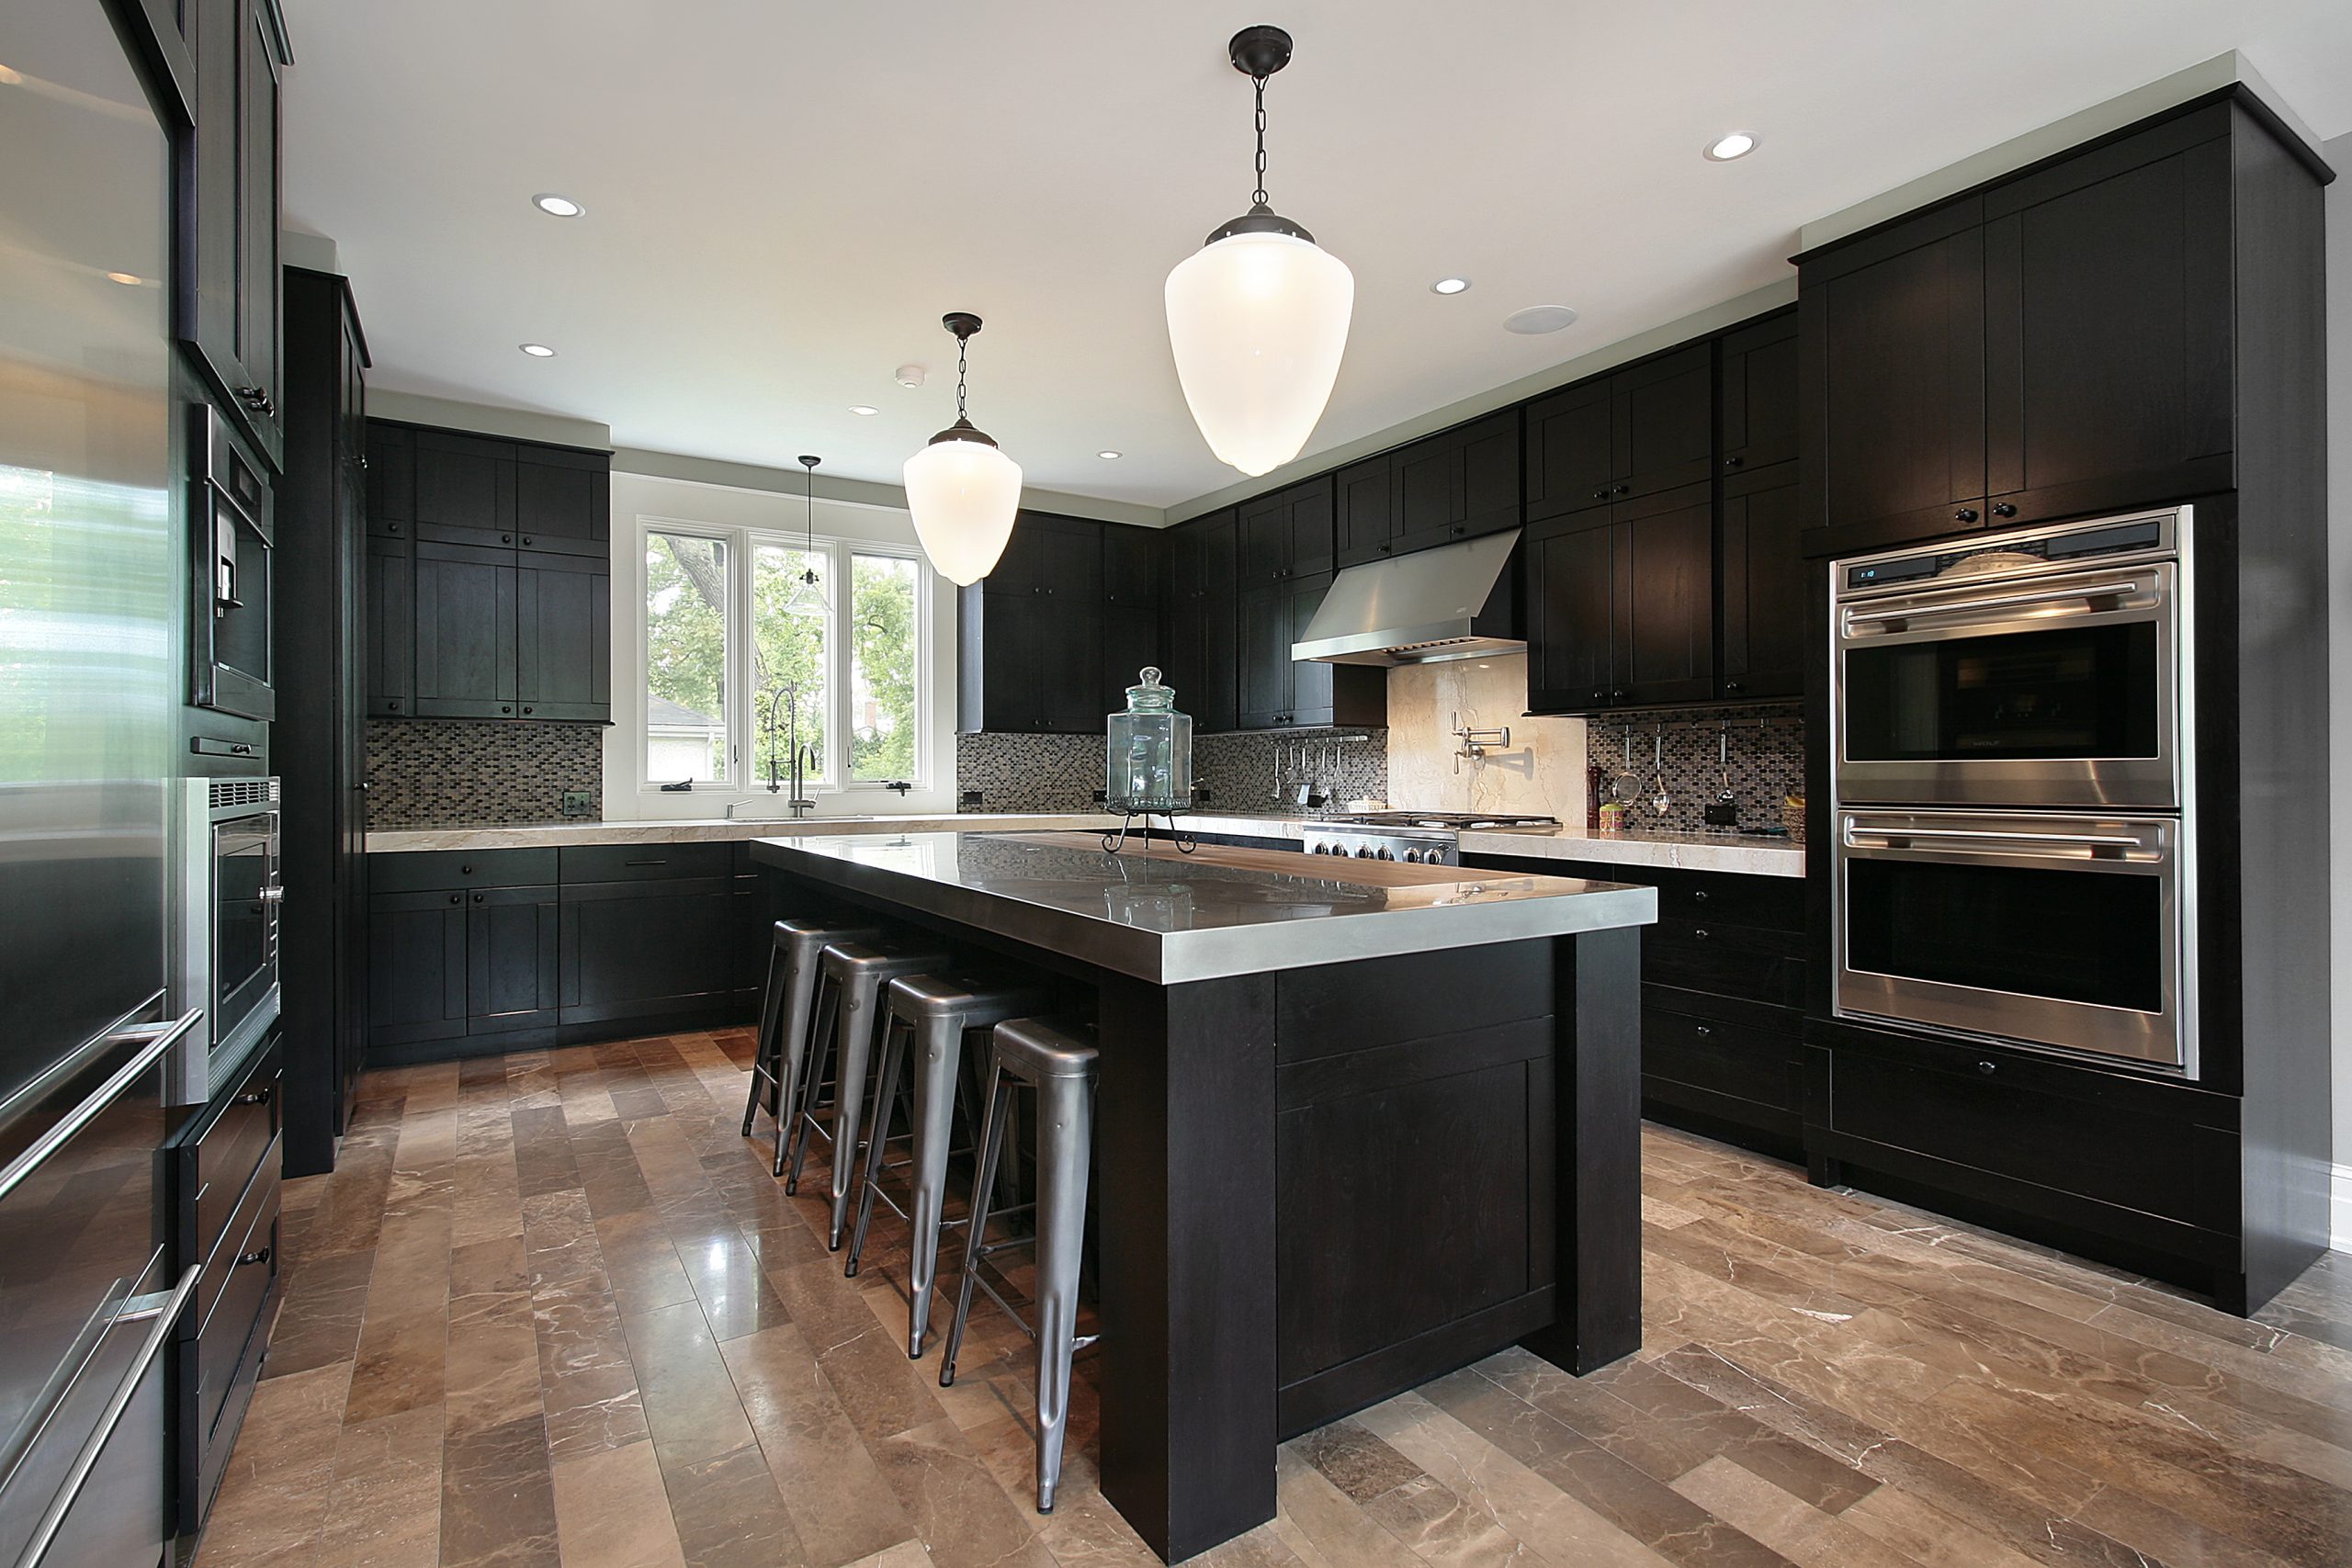 Honed Granite Countertops from Academy Marble